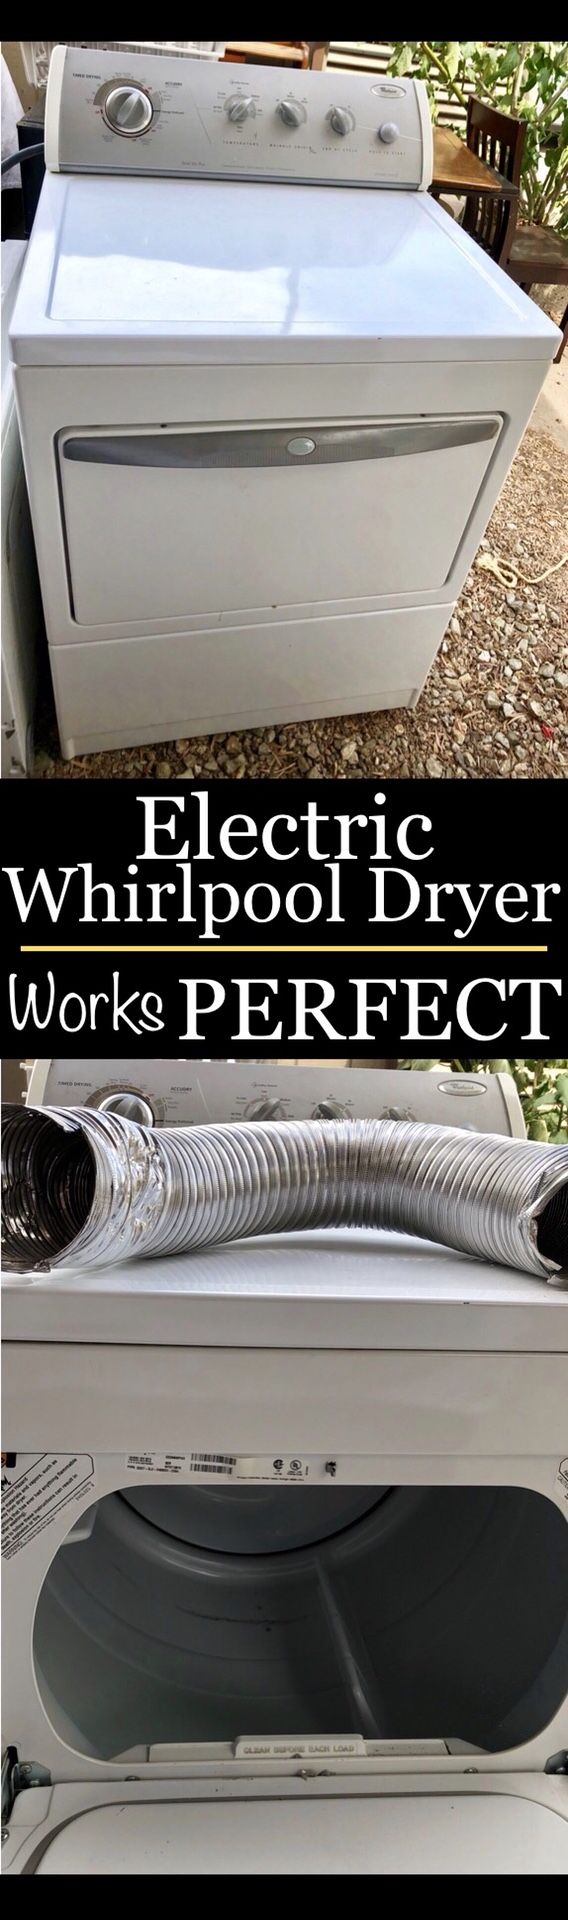 Whirlpool Electric Dryer - Works GREAT!!! 4 Prong 220v Pigtail - White Front Load Electric Dryer Whirlpool Ultimate Care II